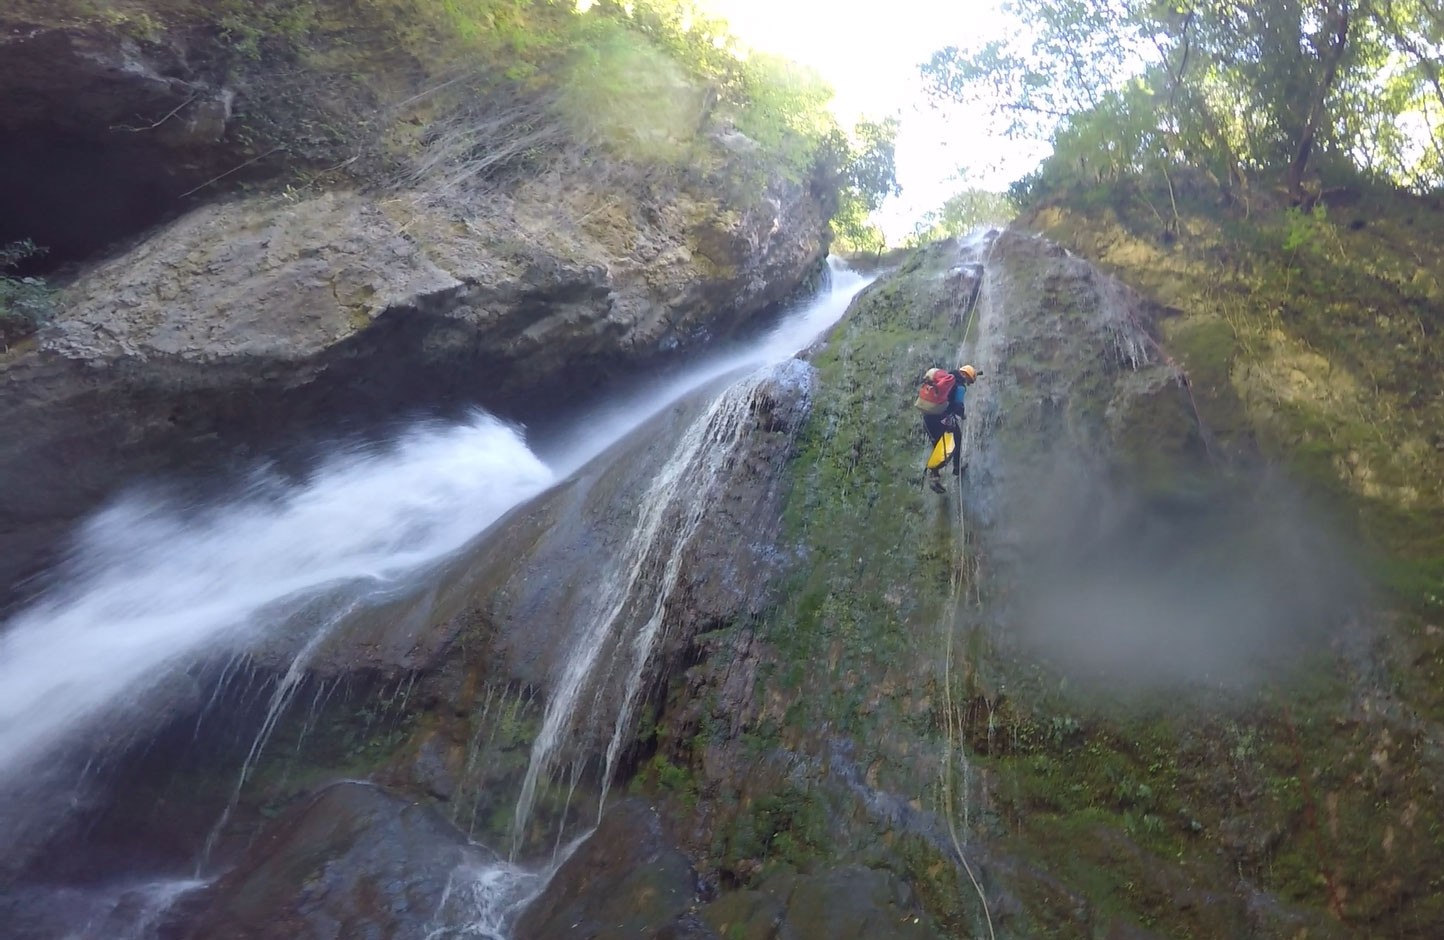 Canyoning in Pale gorge